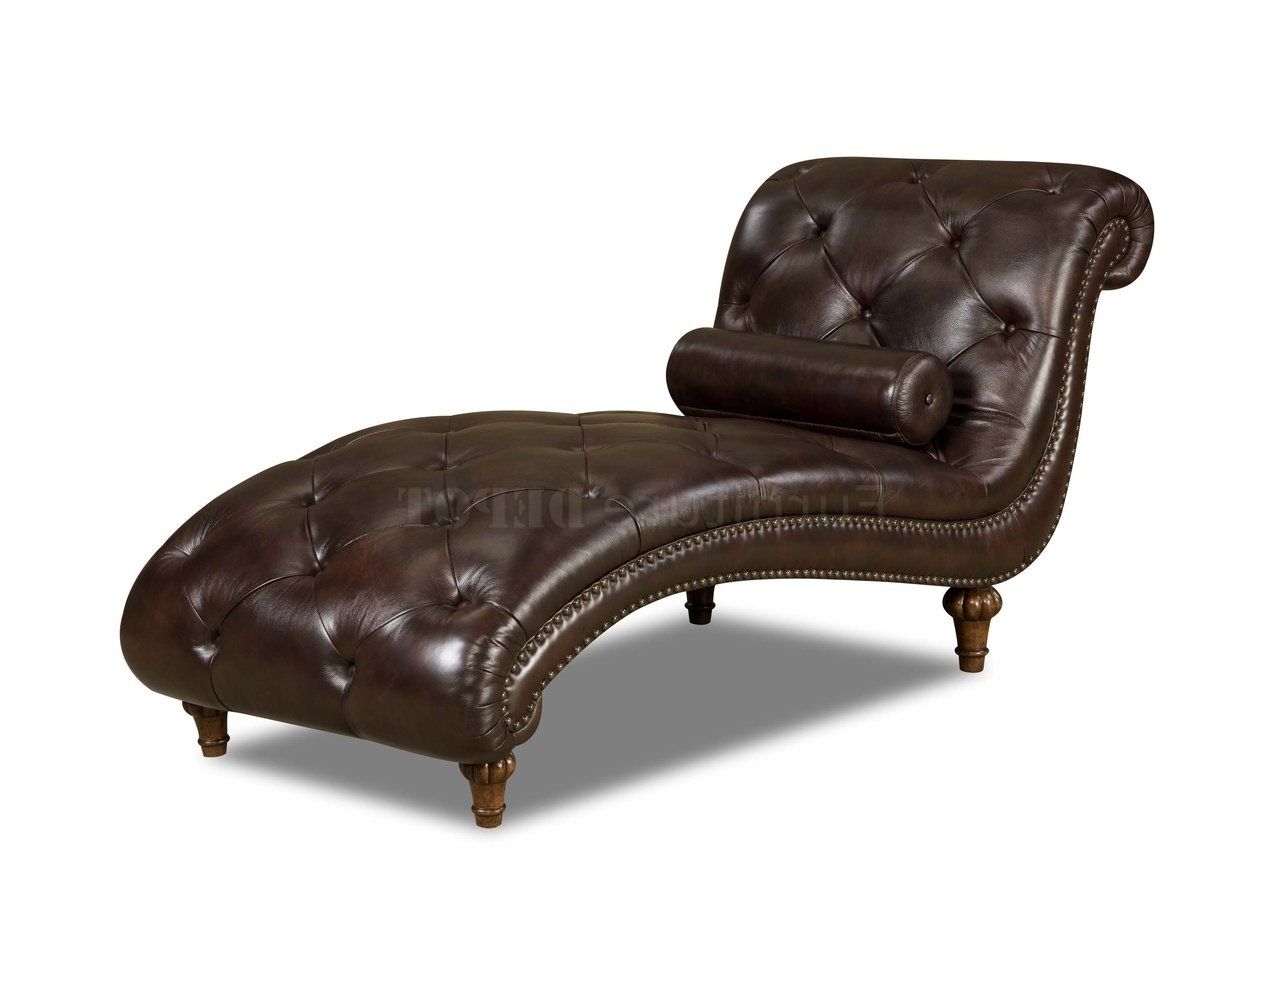 Brown Leather Chaise Lounge Chair • Lounge Chairs Ideas Inside Well Liked Brown Leather Chaises (View 9 of 15)